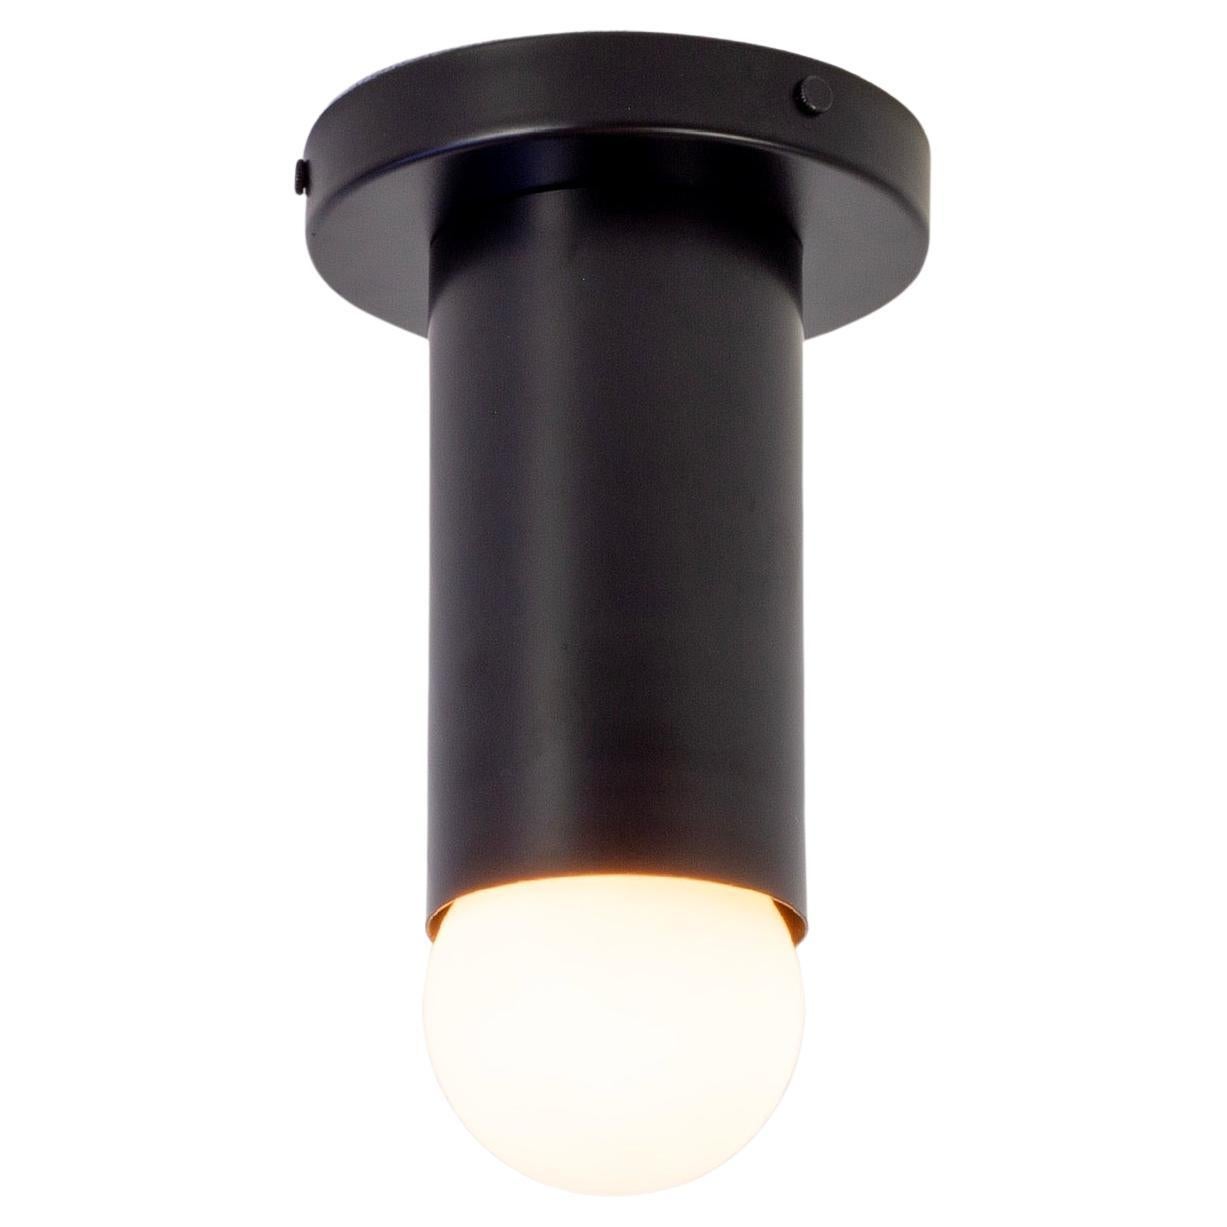 Deep Flush Mount by Research.Lighting, Black, Made to Order